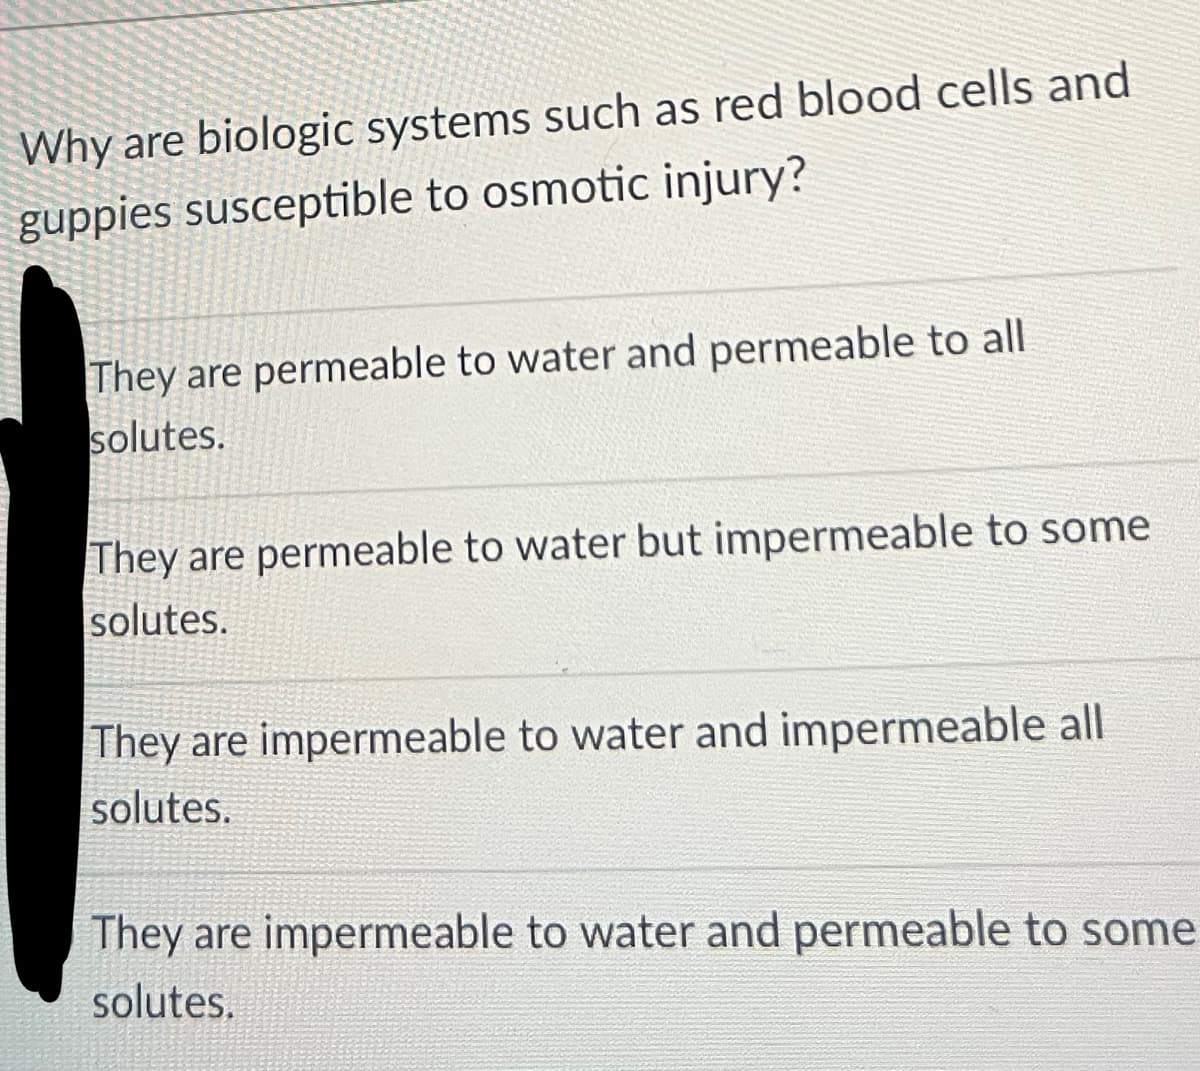 Why are biologic systems such as red blood cells and
guppies susceptible to osmotic injury?
They are permeable to water and permeable to all
solutes.
They are permeable to water but impermeable to some
solutes.
They are impermeable to water and impermeable all
solutes.
They are impermeable to water and permeable to some
solutes.